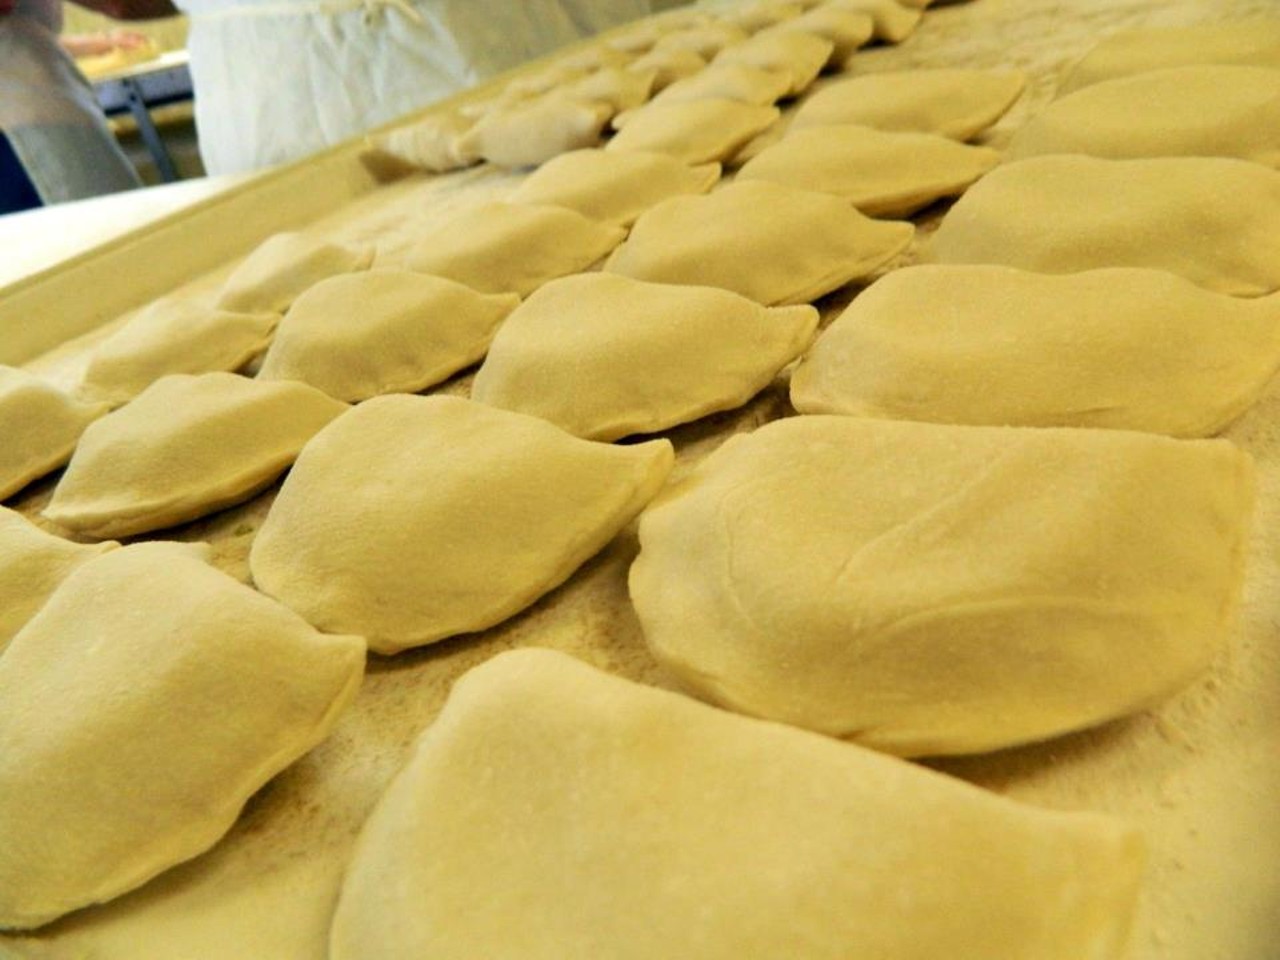 Since 1948, Rudy's has been representing Parma with delicious pierogies like spinach & mozzarella and apple! Try some today at 5580 Ridge Rd, Parma.